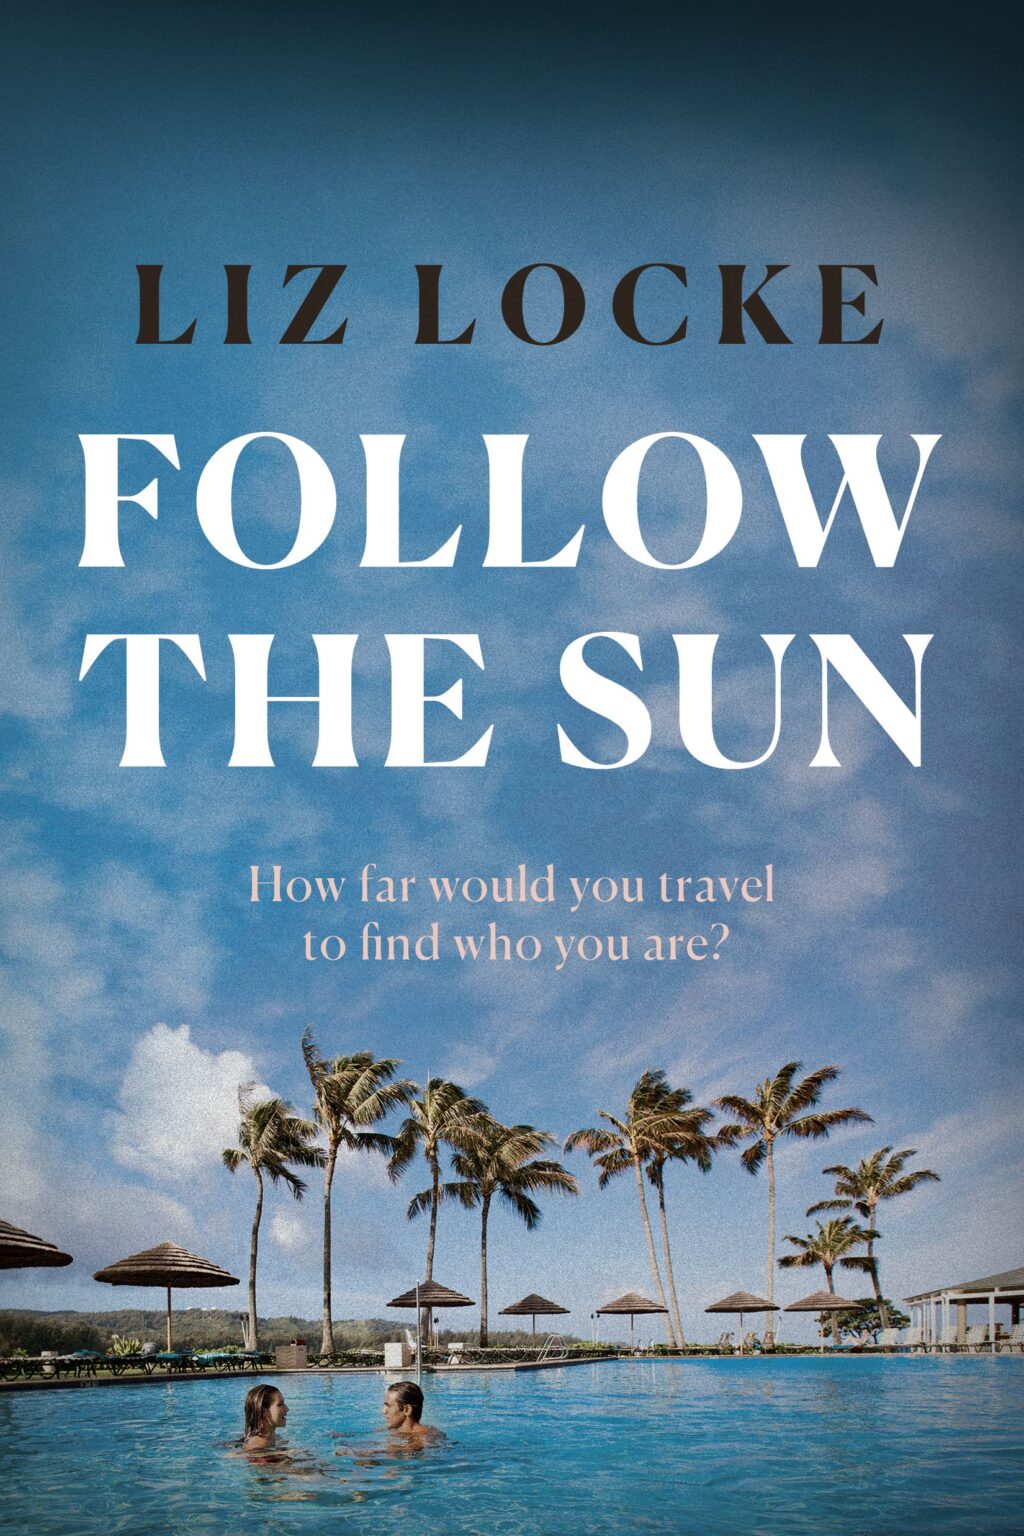 How much of Locke's own experiences have shaped the engaging characters and vivid locales of her debut novel?